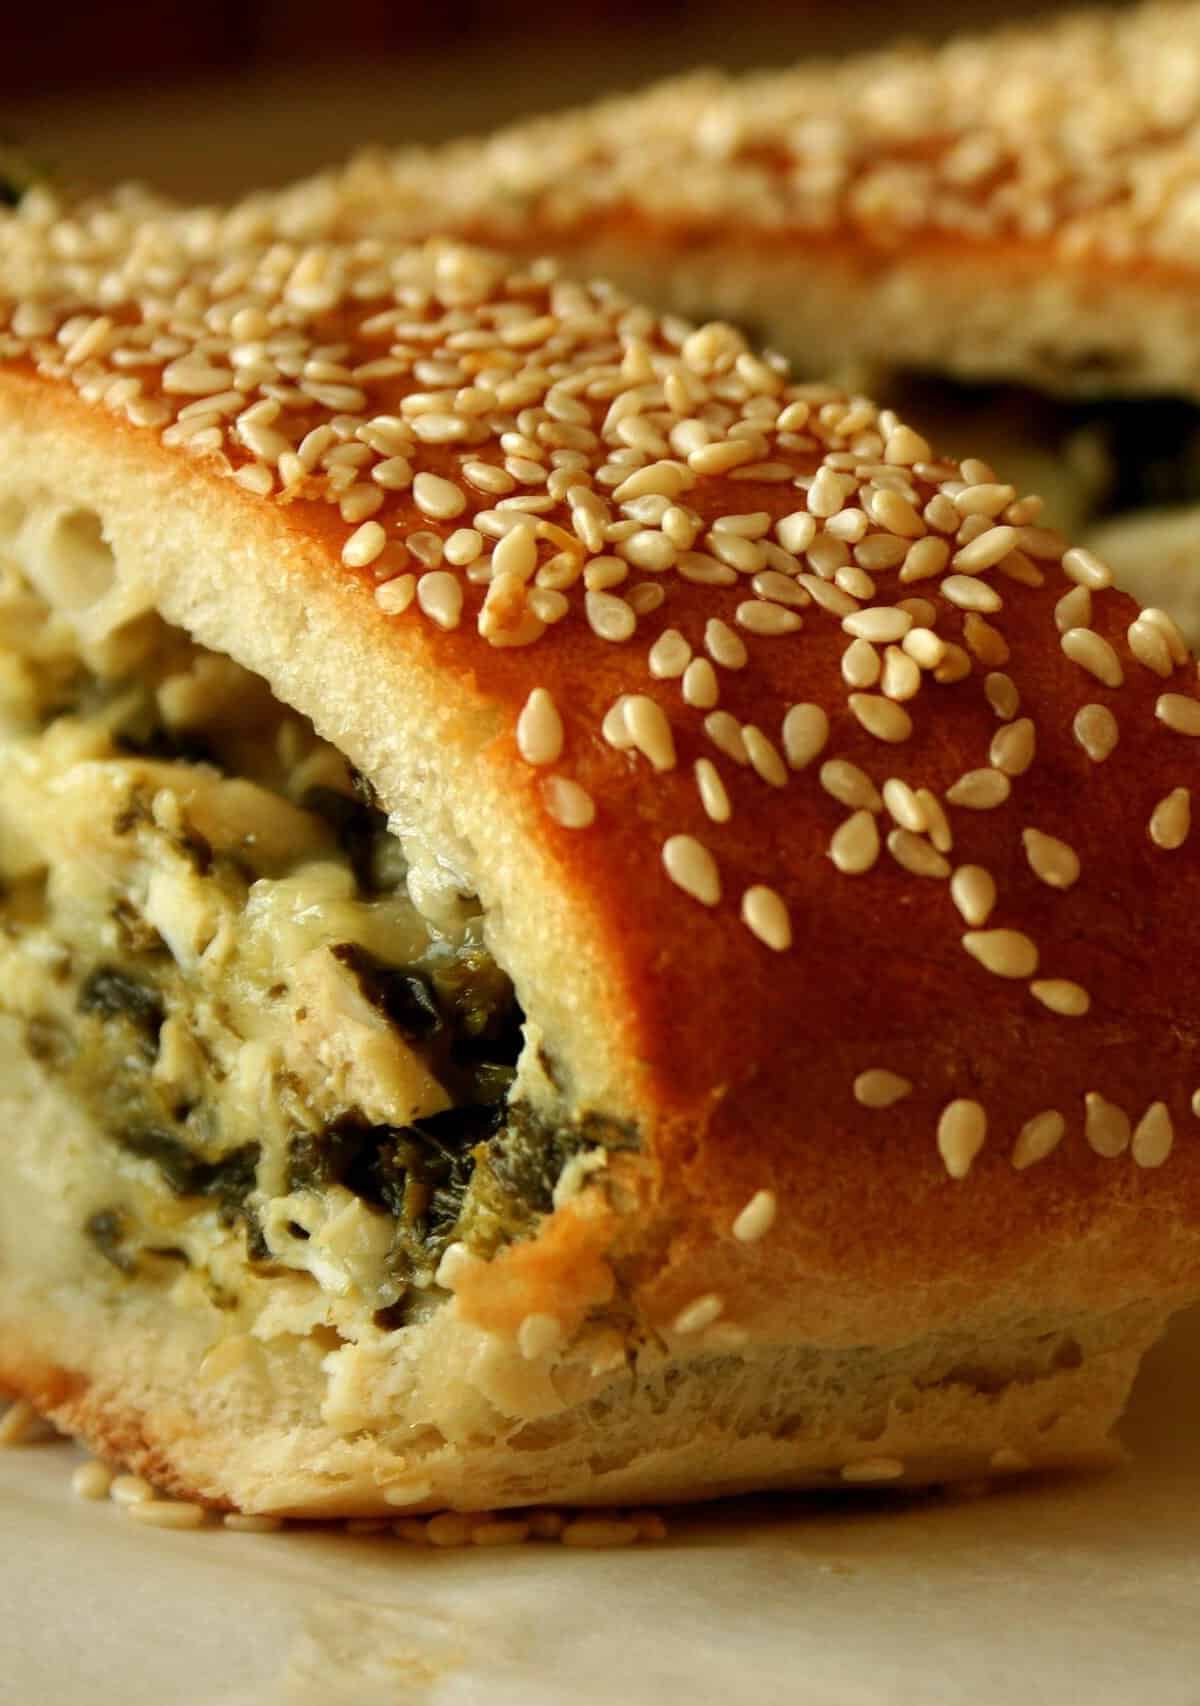 ) “Savor the Taste of Homemade Picnic Bread with Our Recipe